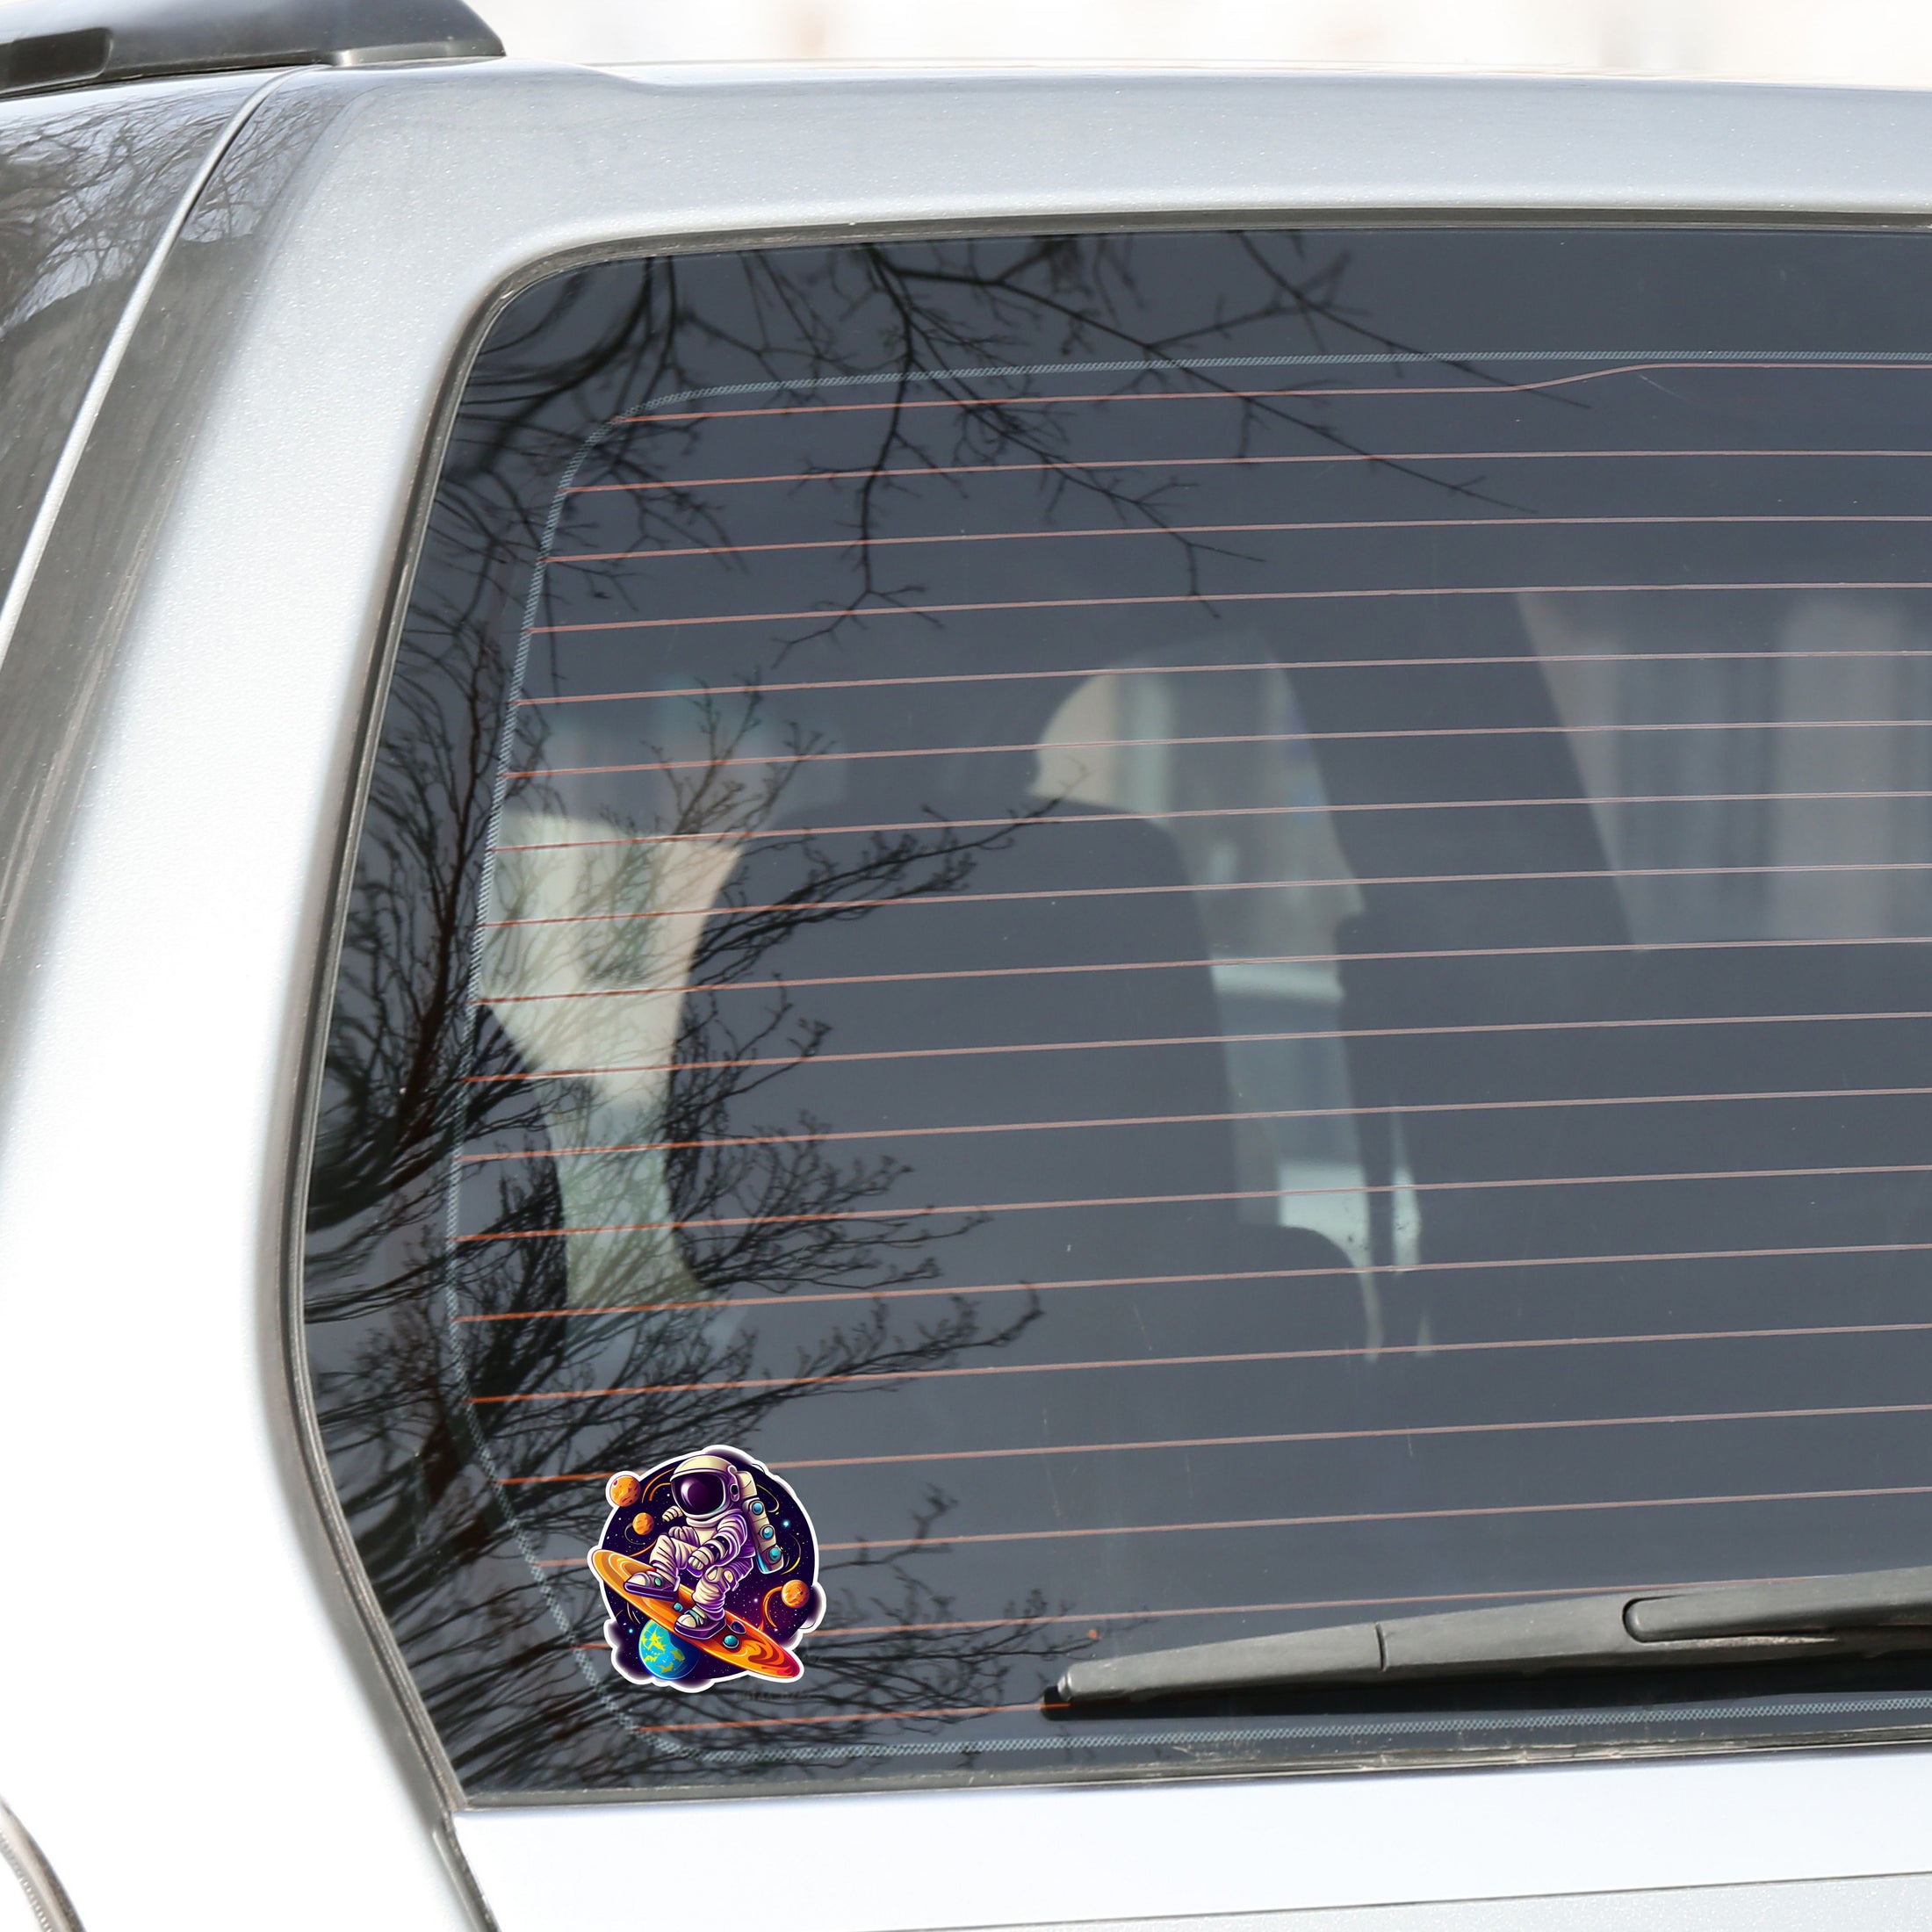 This image show the astronaut surfing sticker on the back window of a car.r